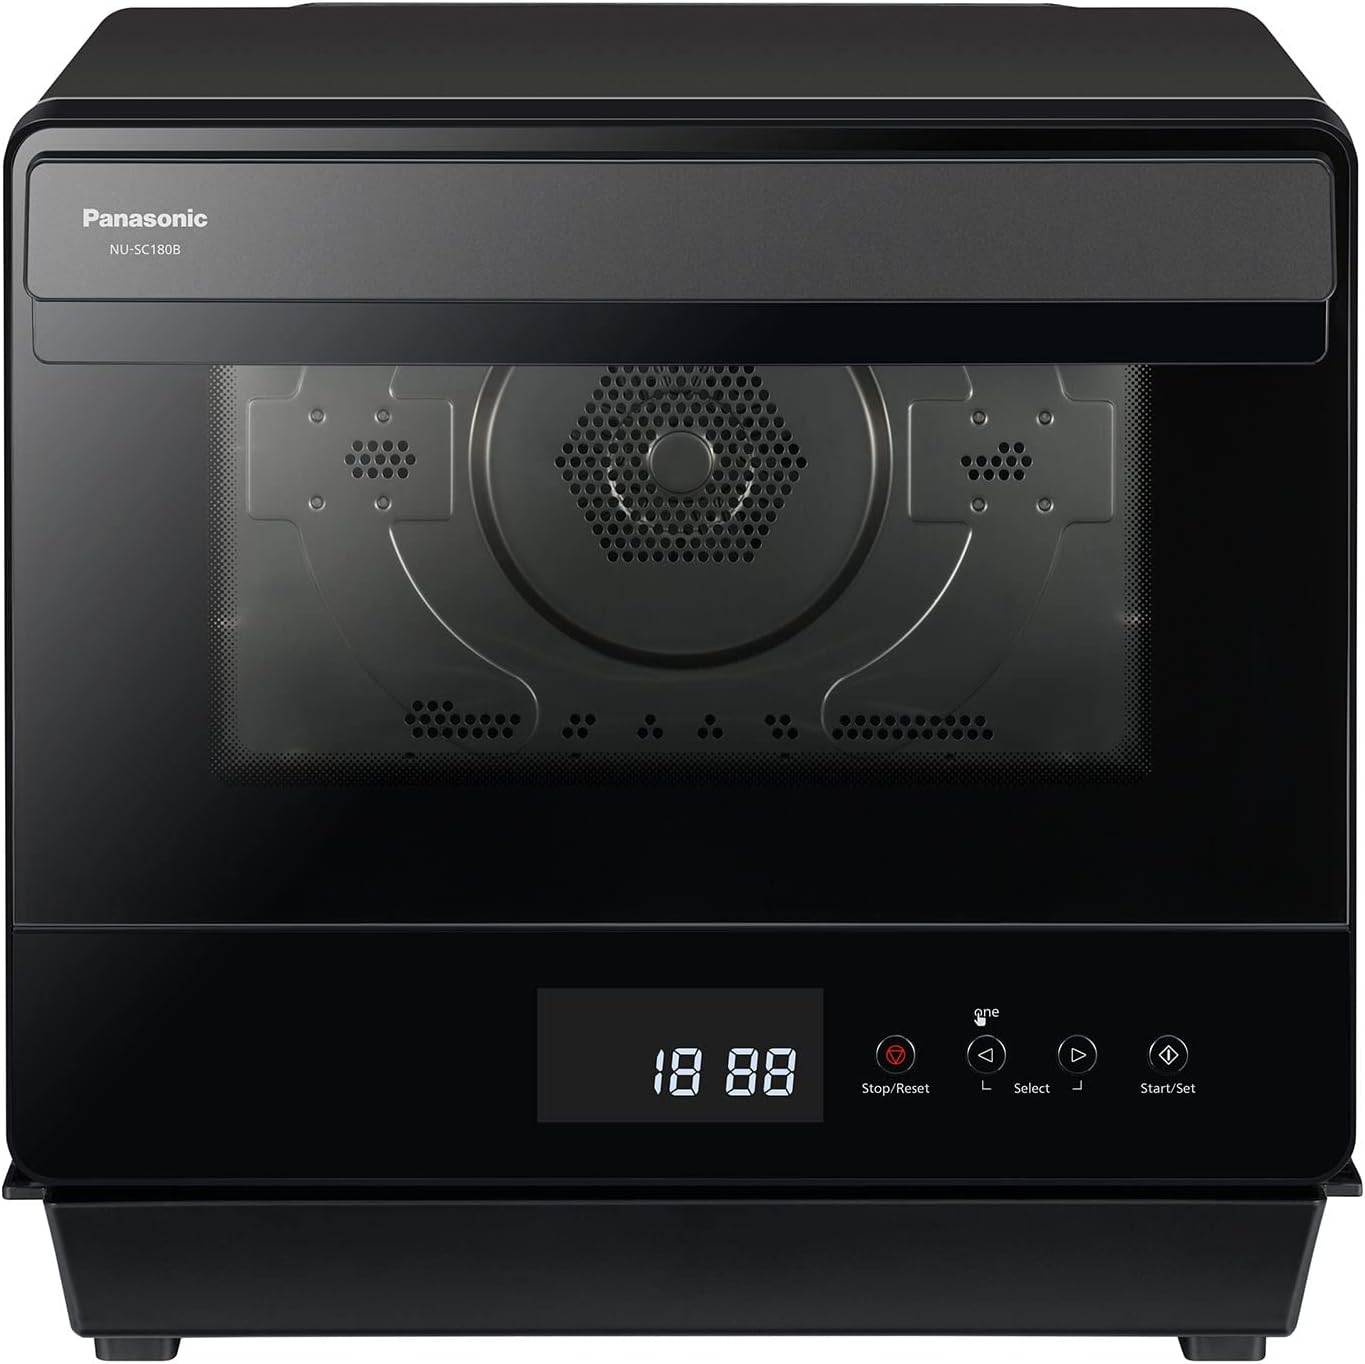 Panasonic HomeChef 7in1 Compact Oven: Unlock Culinary Versatility in Your Kitchen